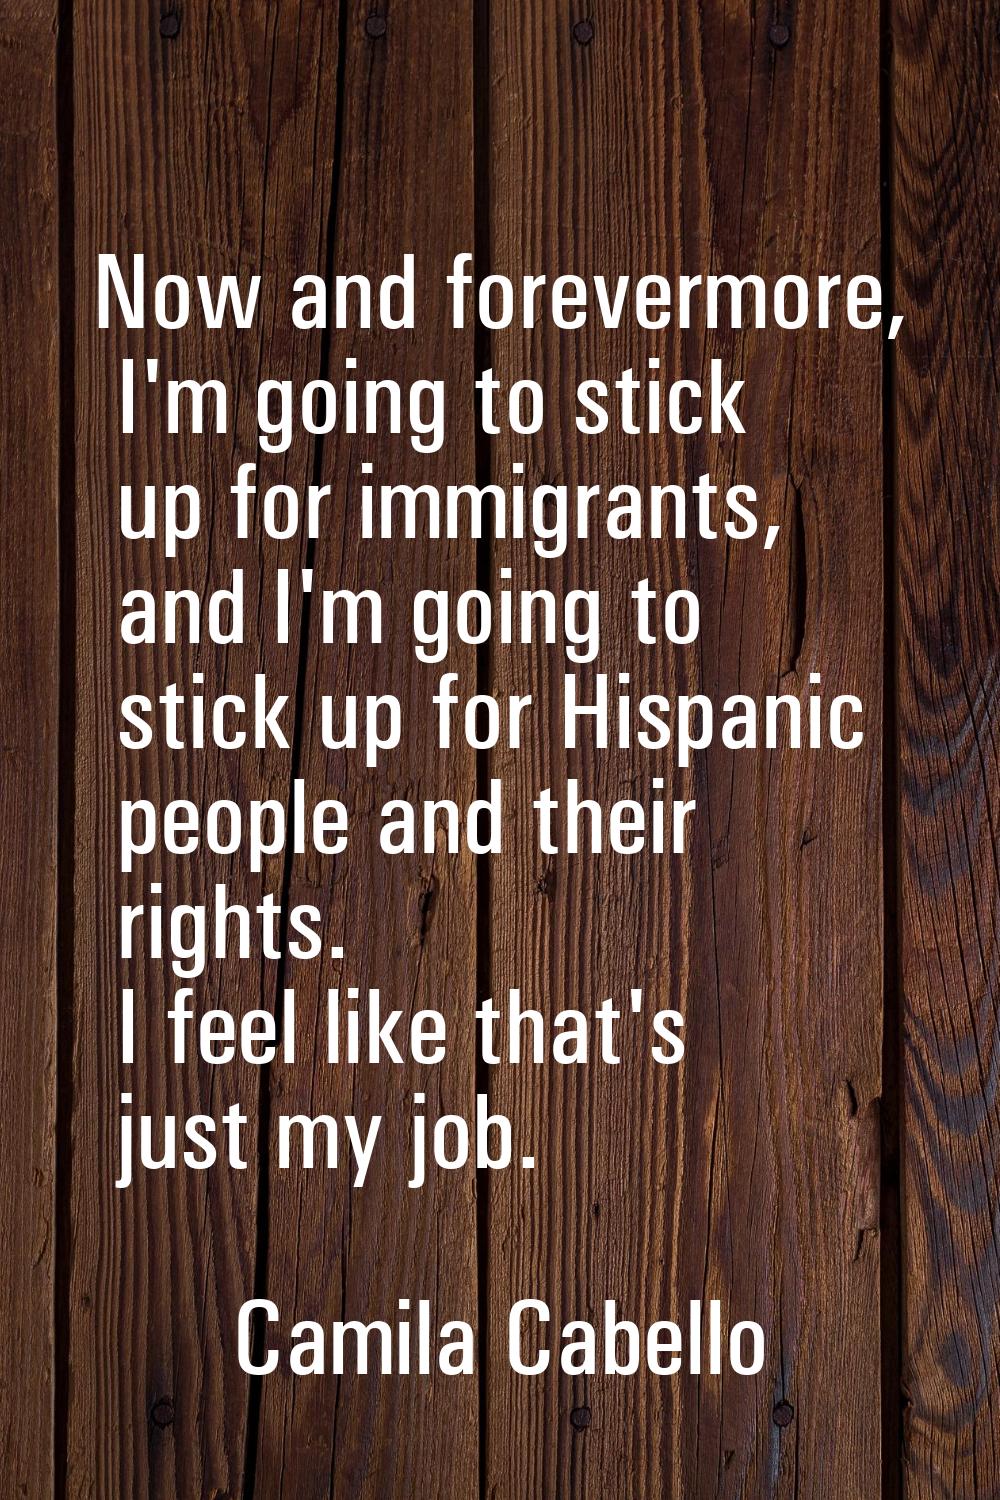 Now and forevermore, I'm going to stick up for immigrants, and I'm going to stick up for Hispanic p